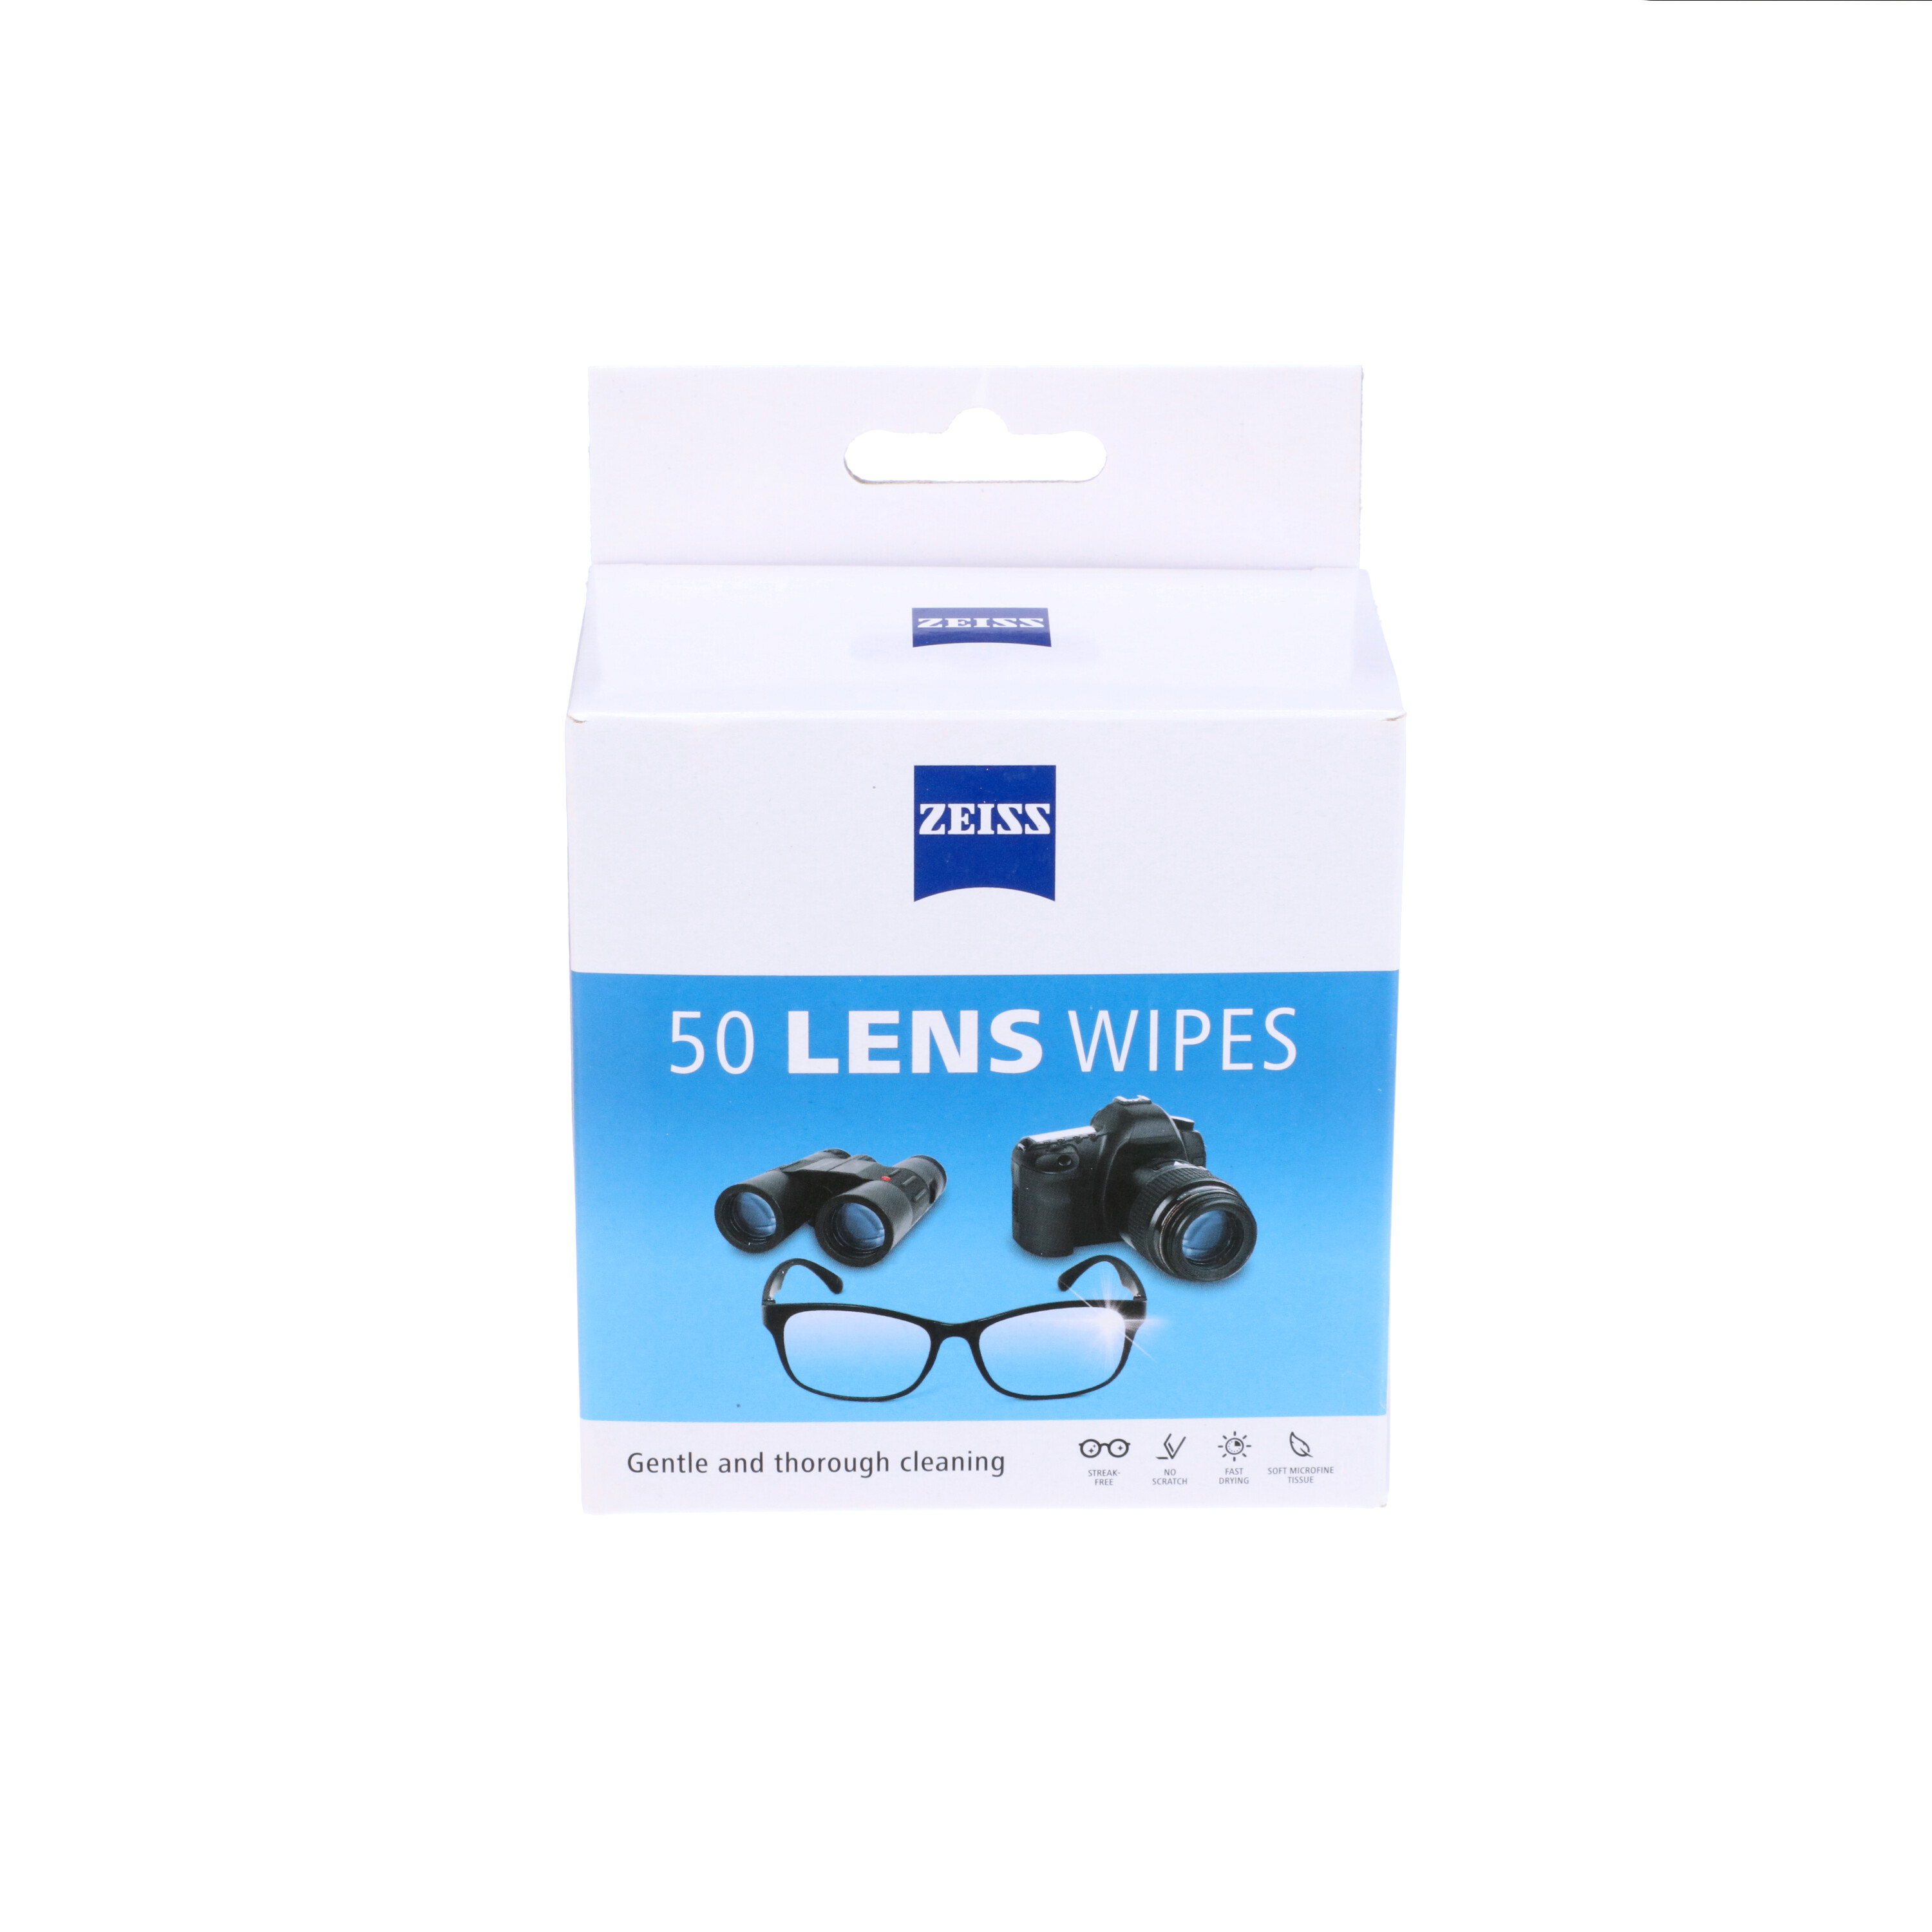 ZEISS Gentle and Thorough Cleaning Eyeglass Lens Cleaner Wipes, 225 Count 